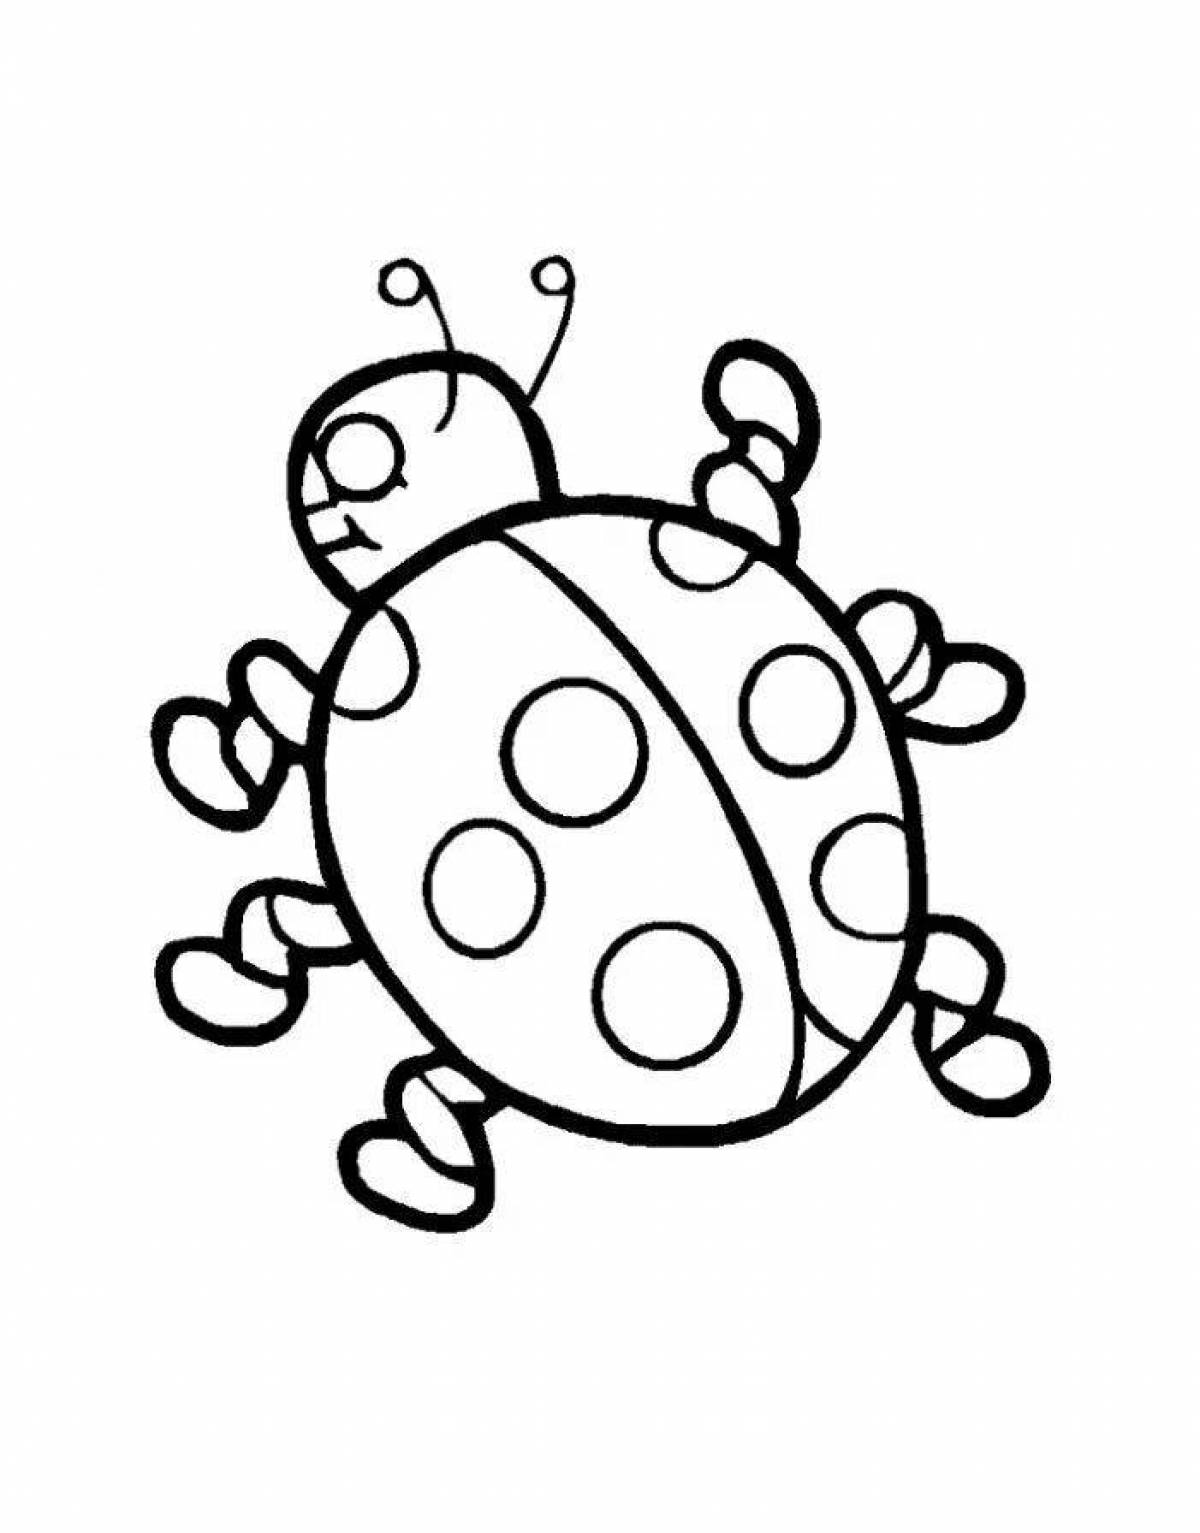 Funny ladybug coloring book for kids